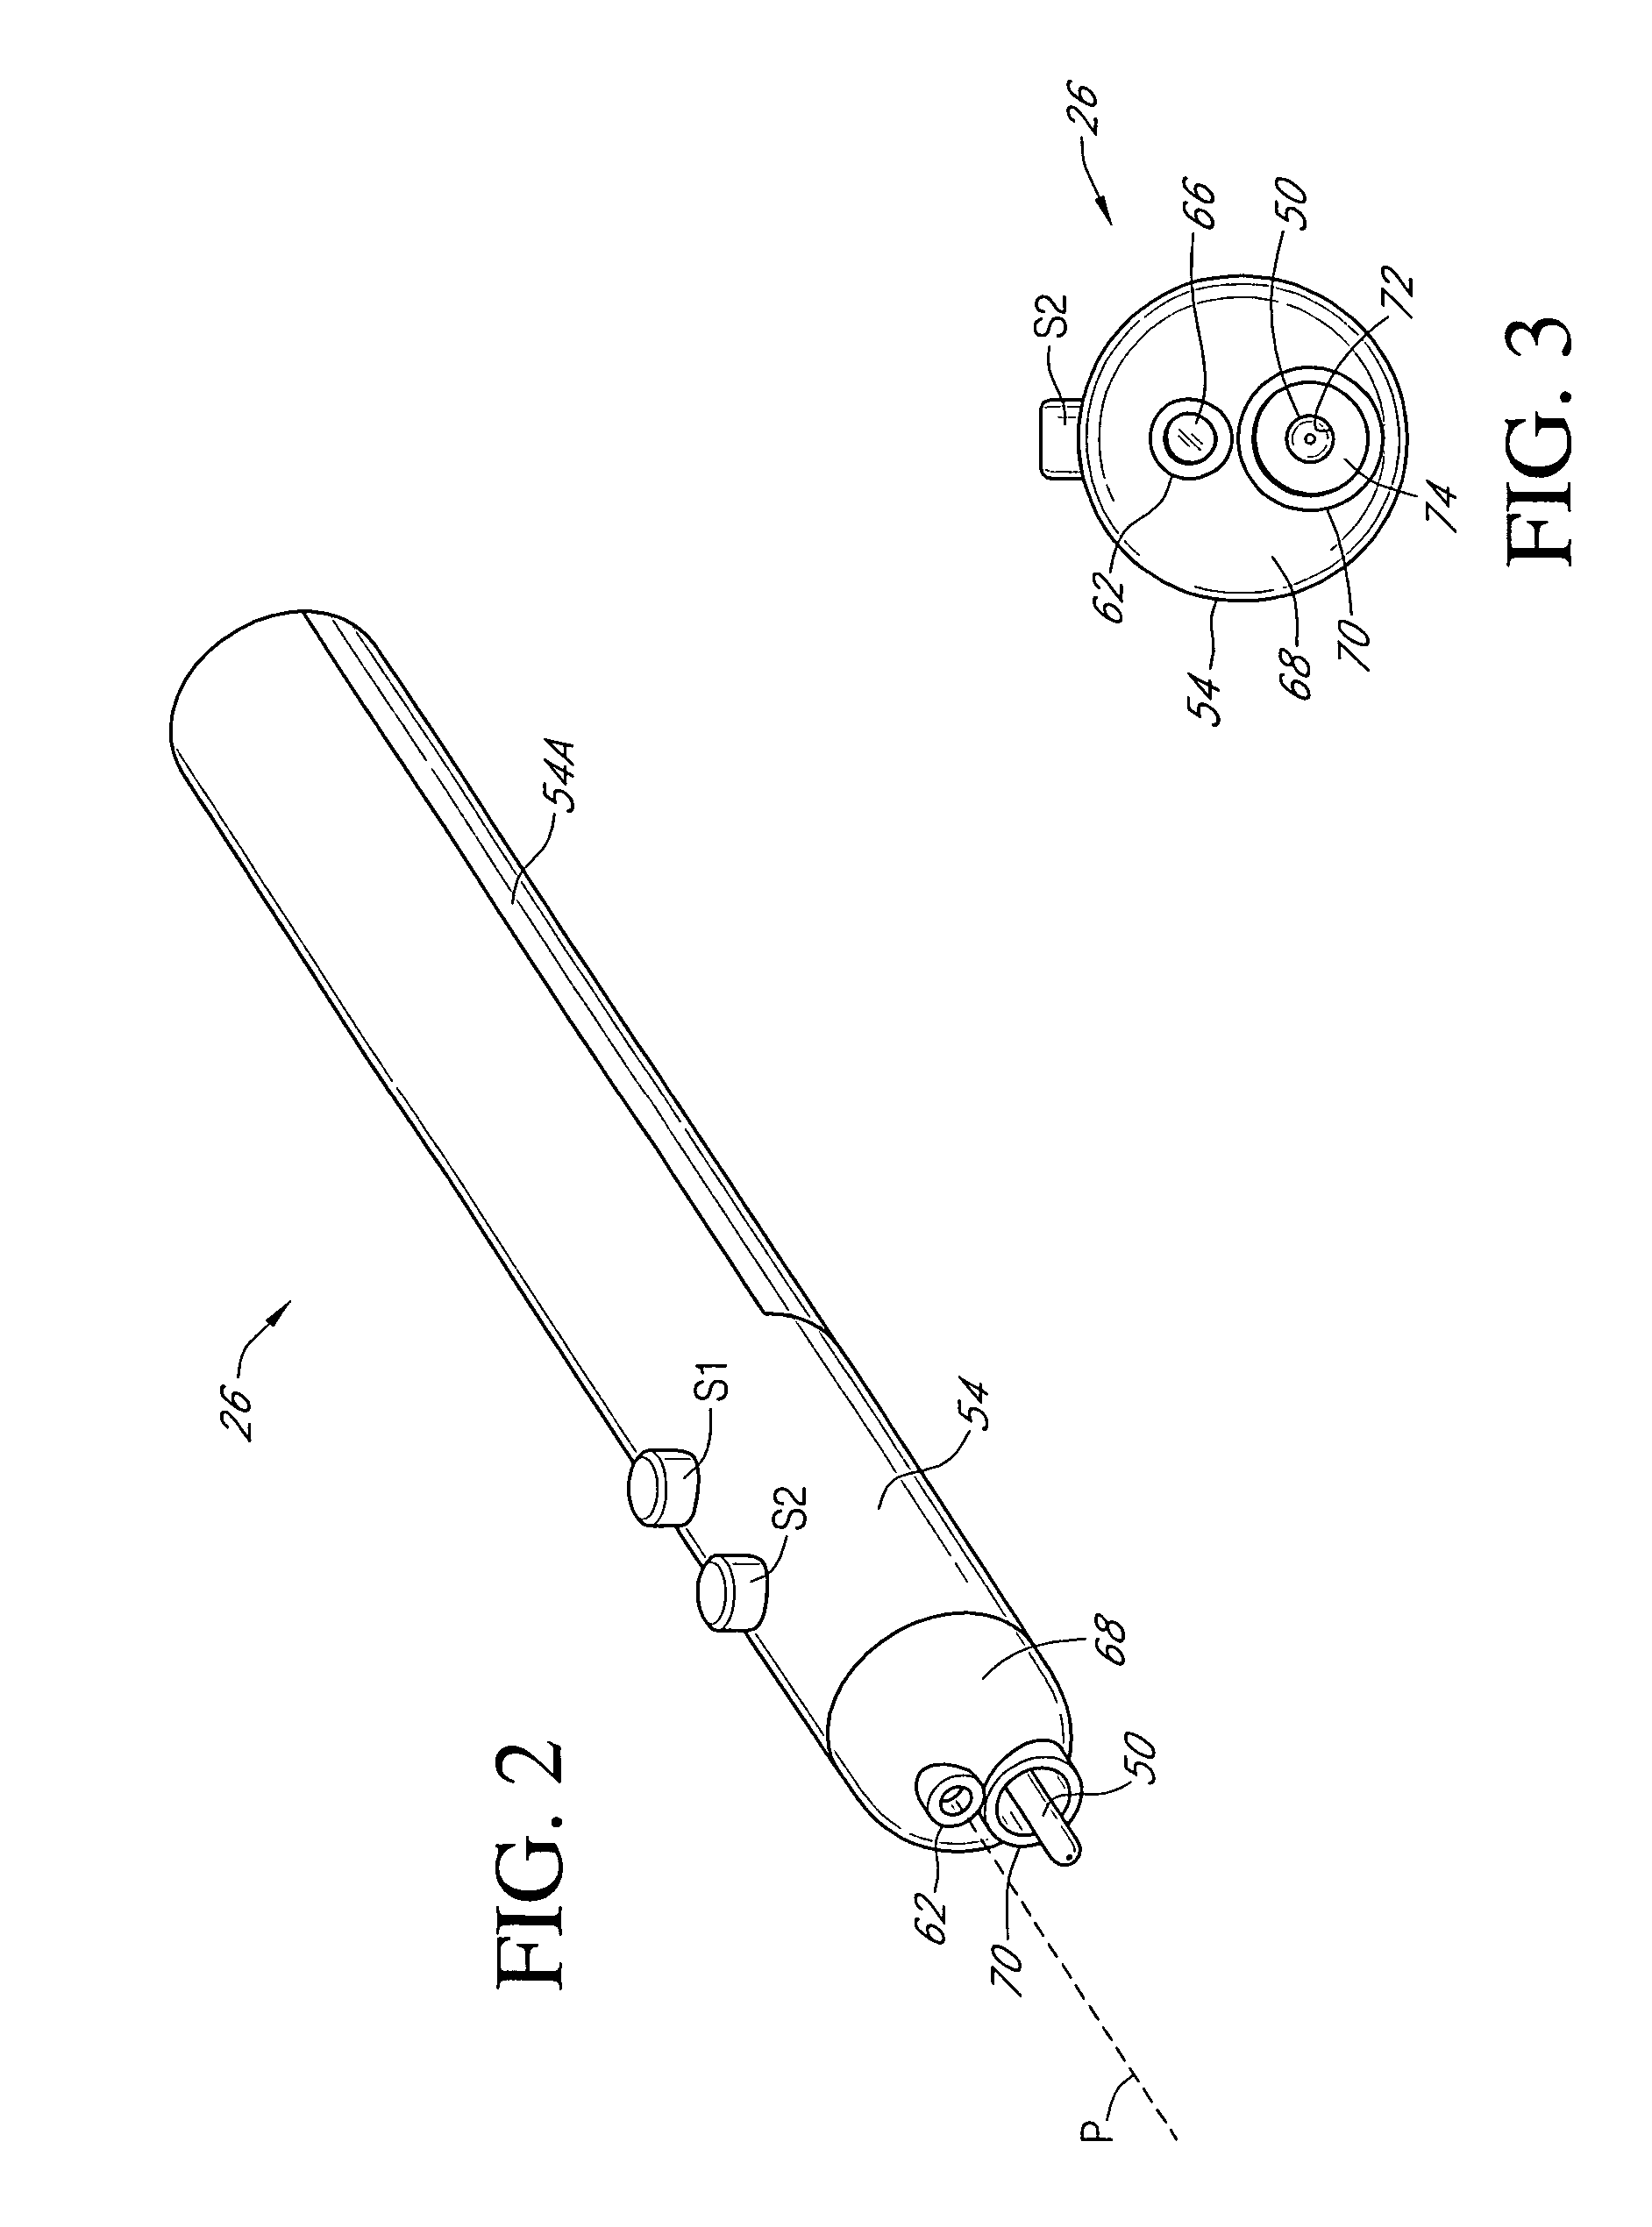 Multi-mode optical pointer for interactive display system